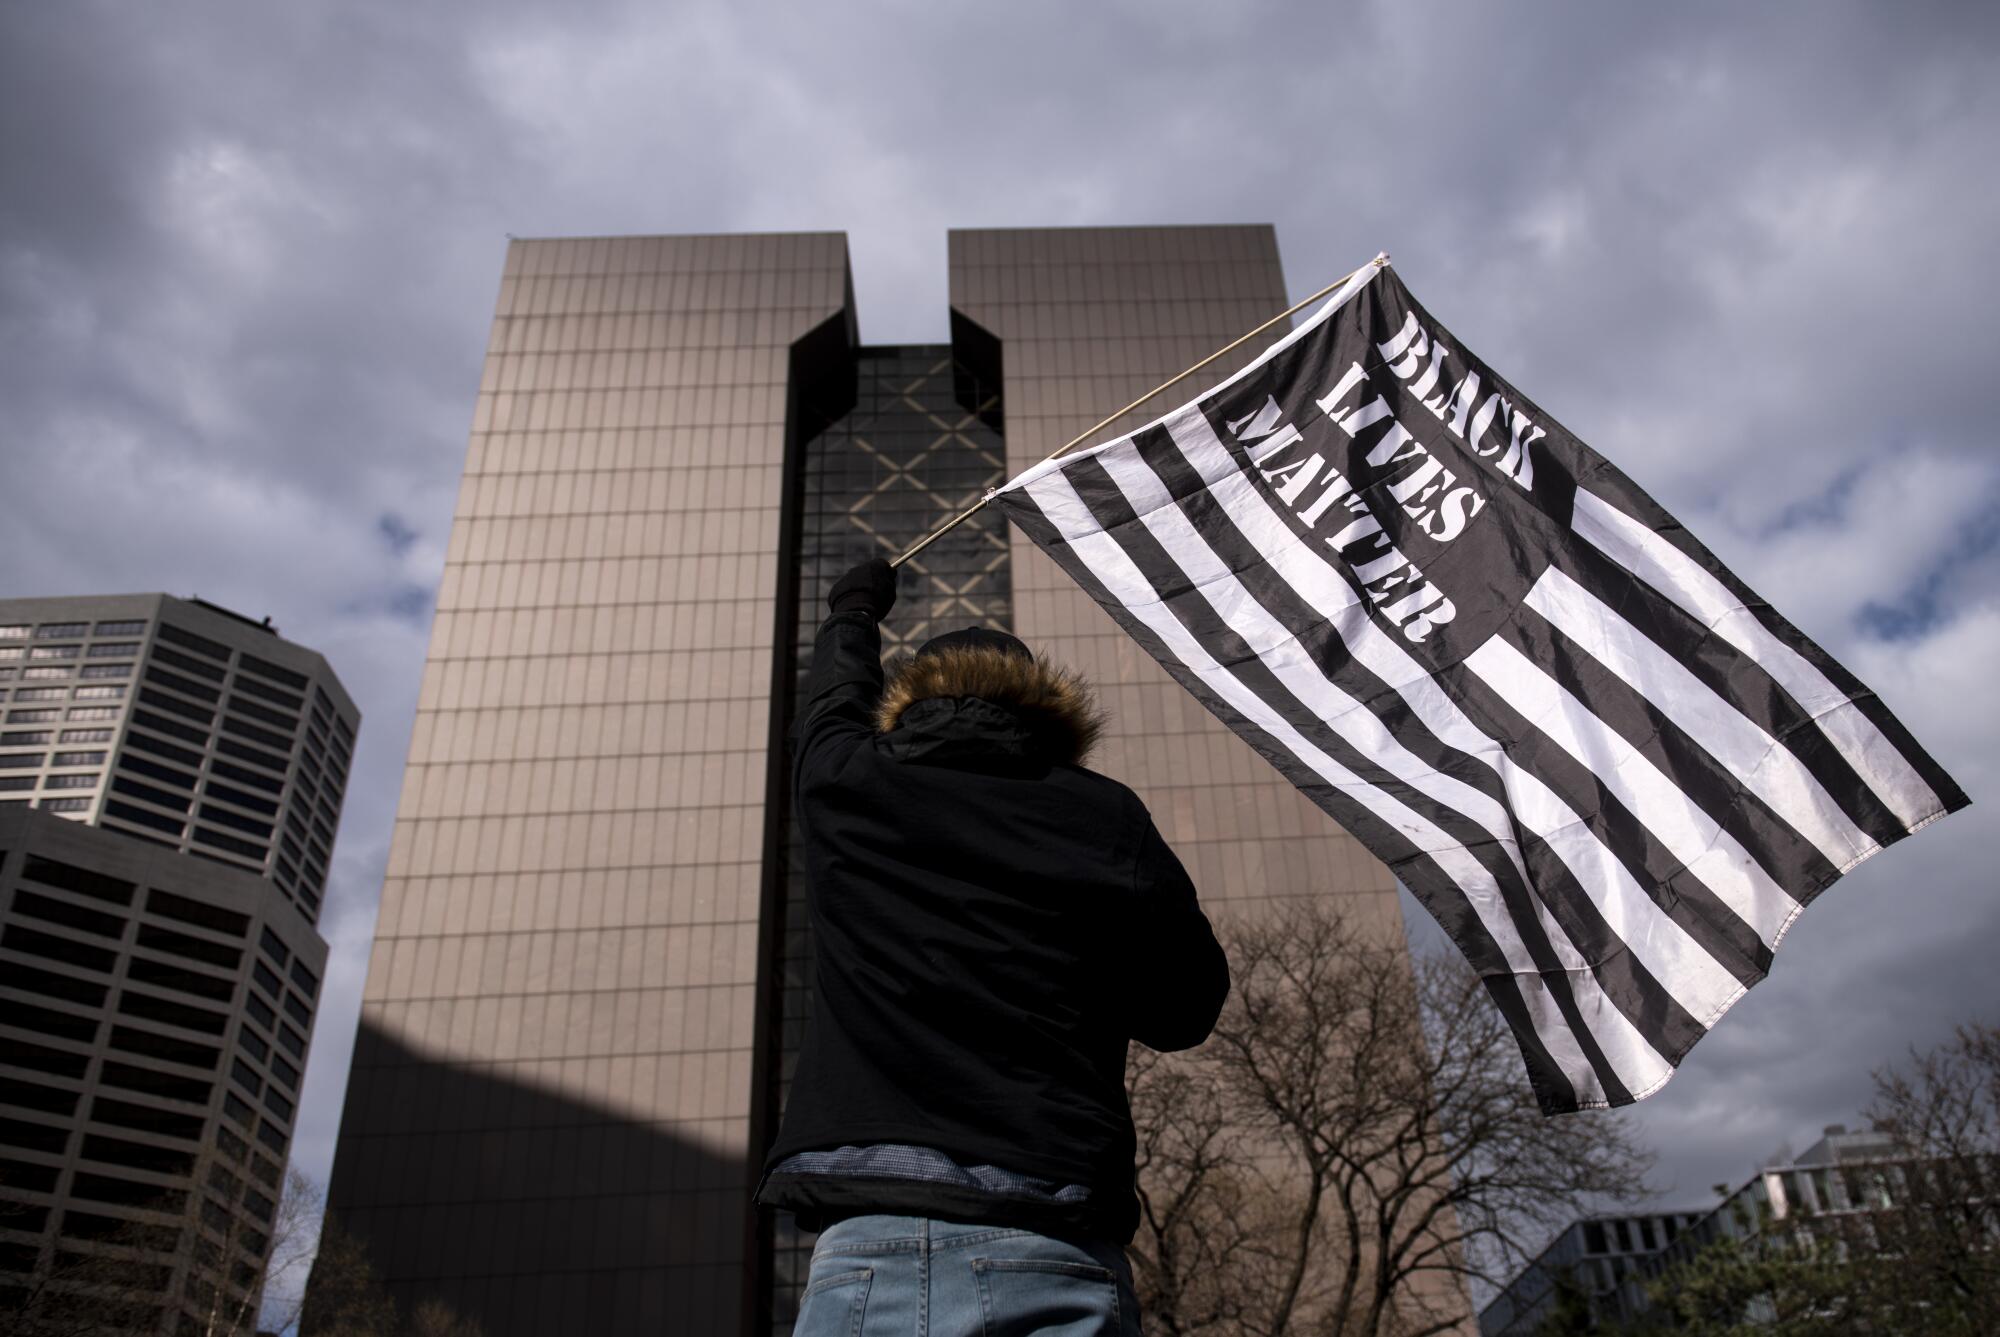 A person hoists a black-and-white striped flag with the words Black Lives Matter in front of tall buildings 